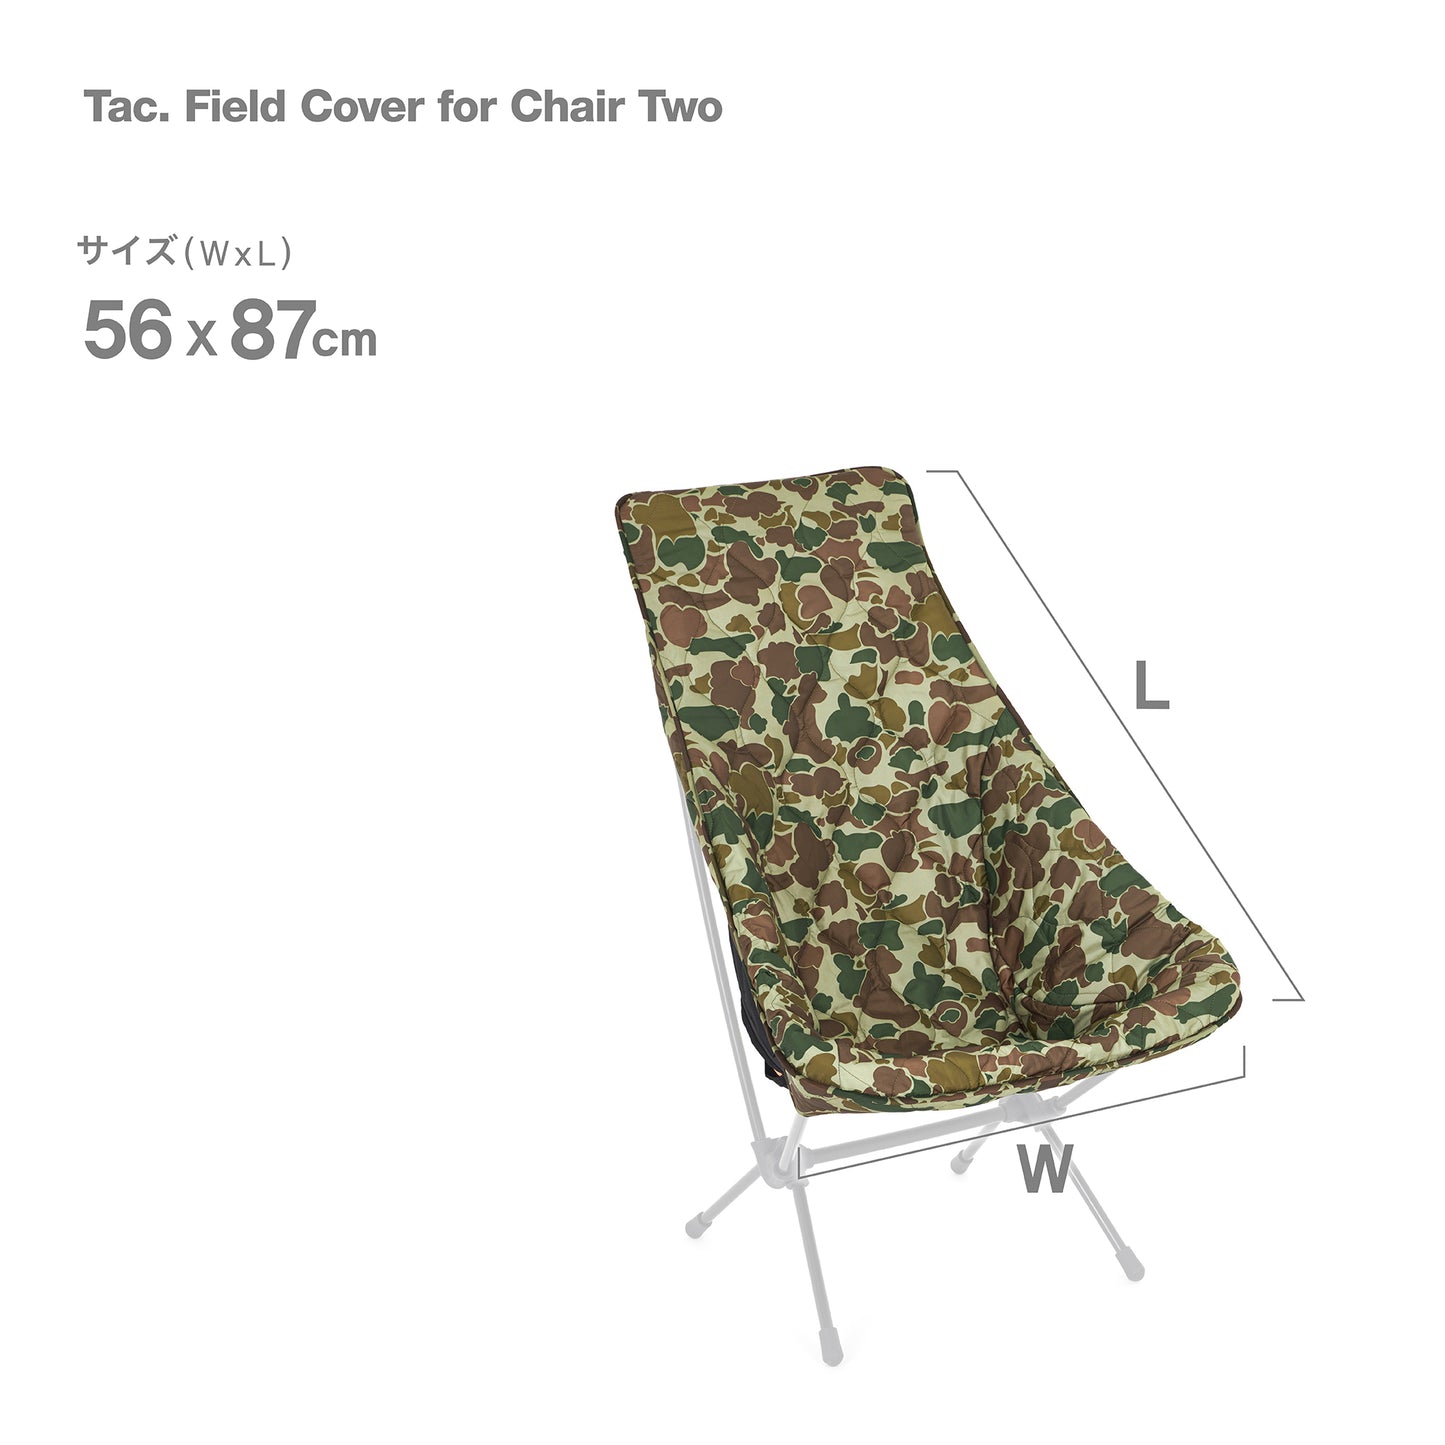 Tac. Field Cover for Chair Two - Duck Camo / Orange